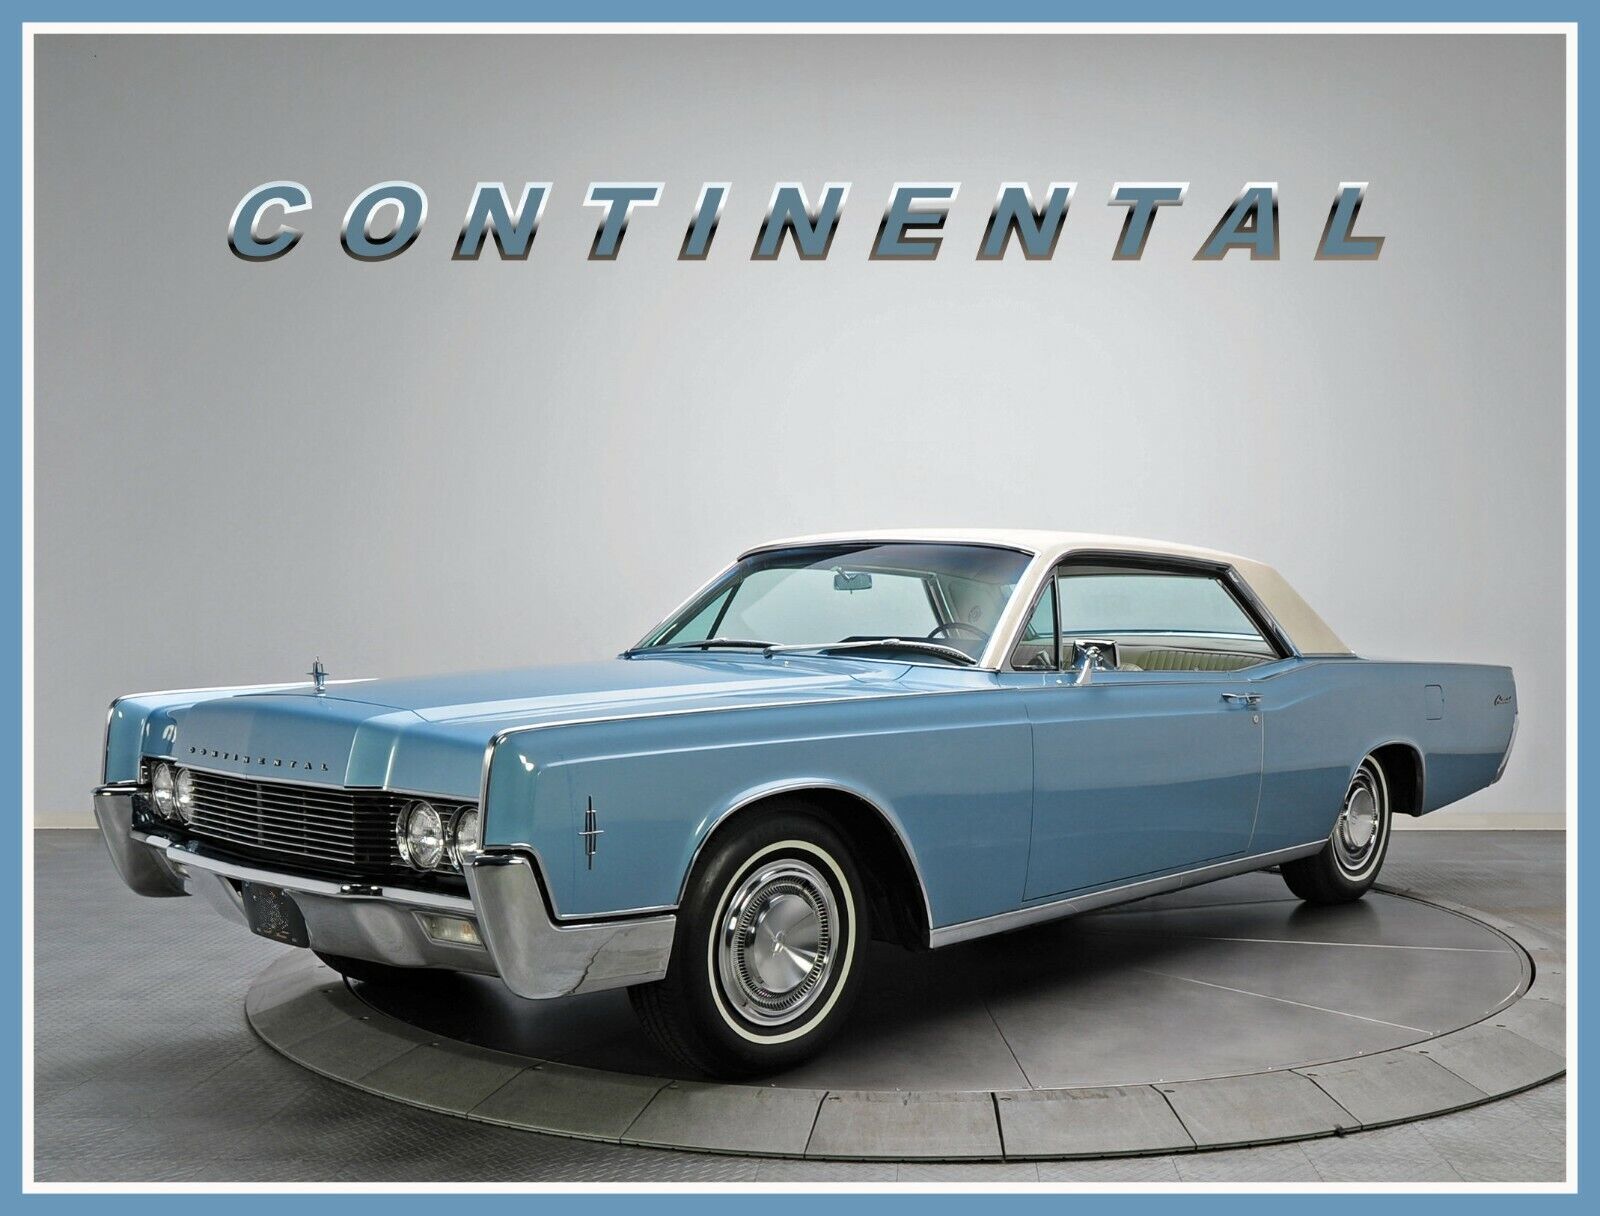 1966 Lincoln Continental Coupe, Blue/White, Front, Refrigerator Magnet, 40 MIL